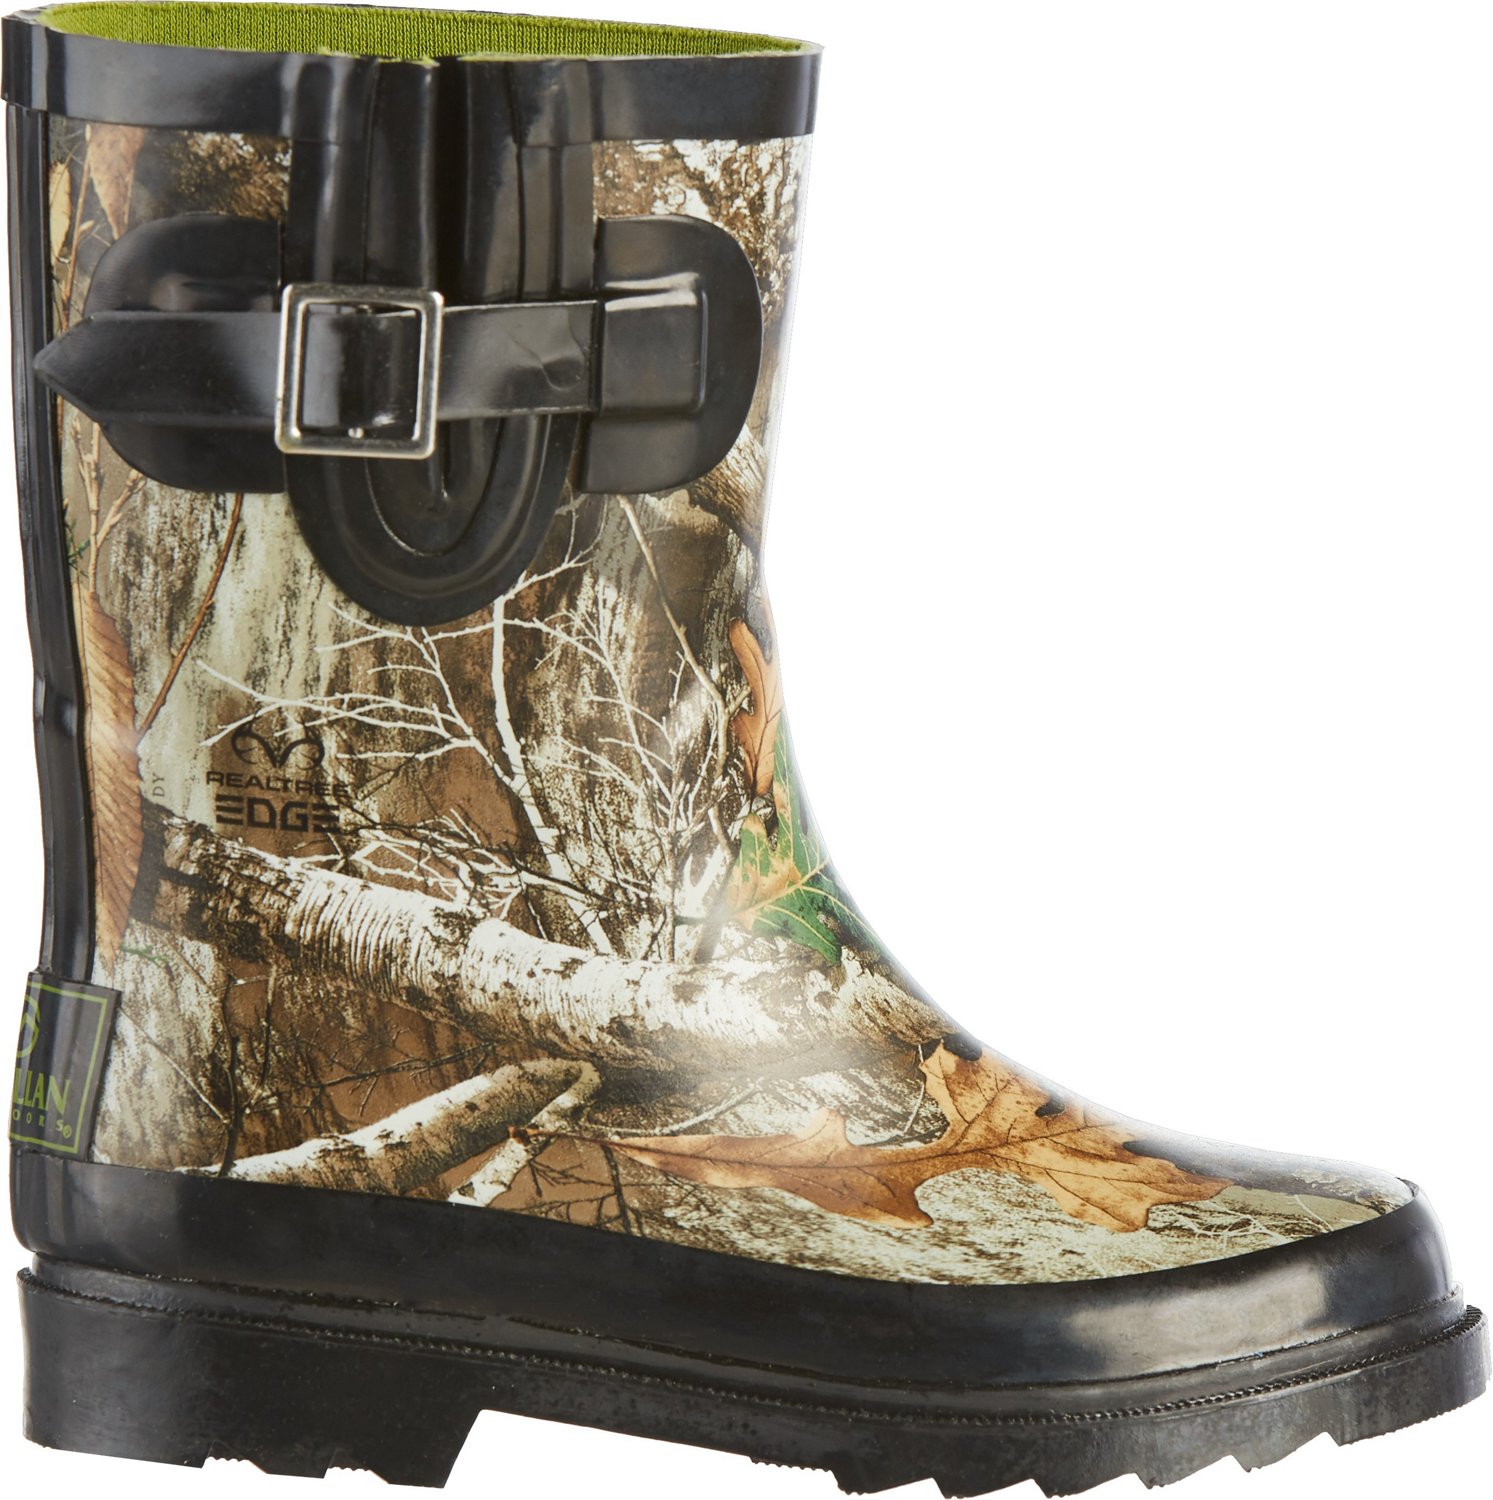 boys rubber boots